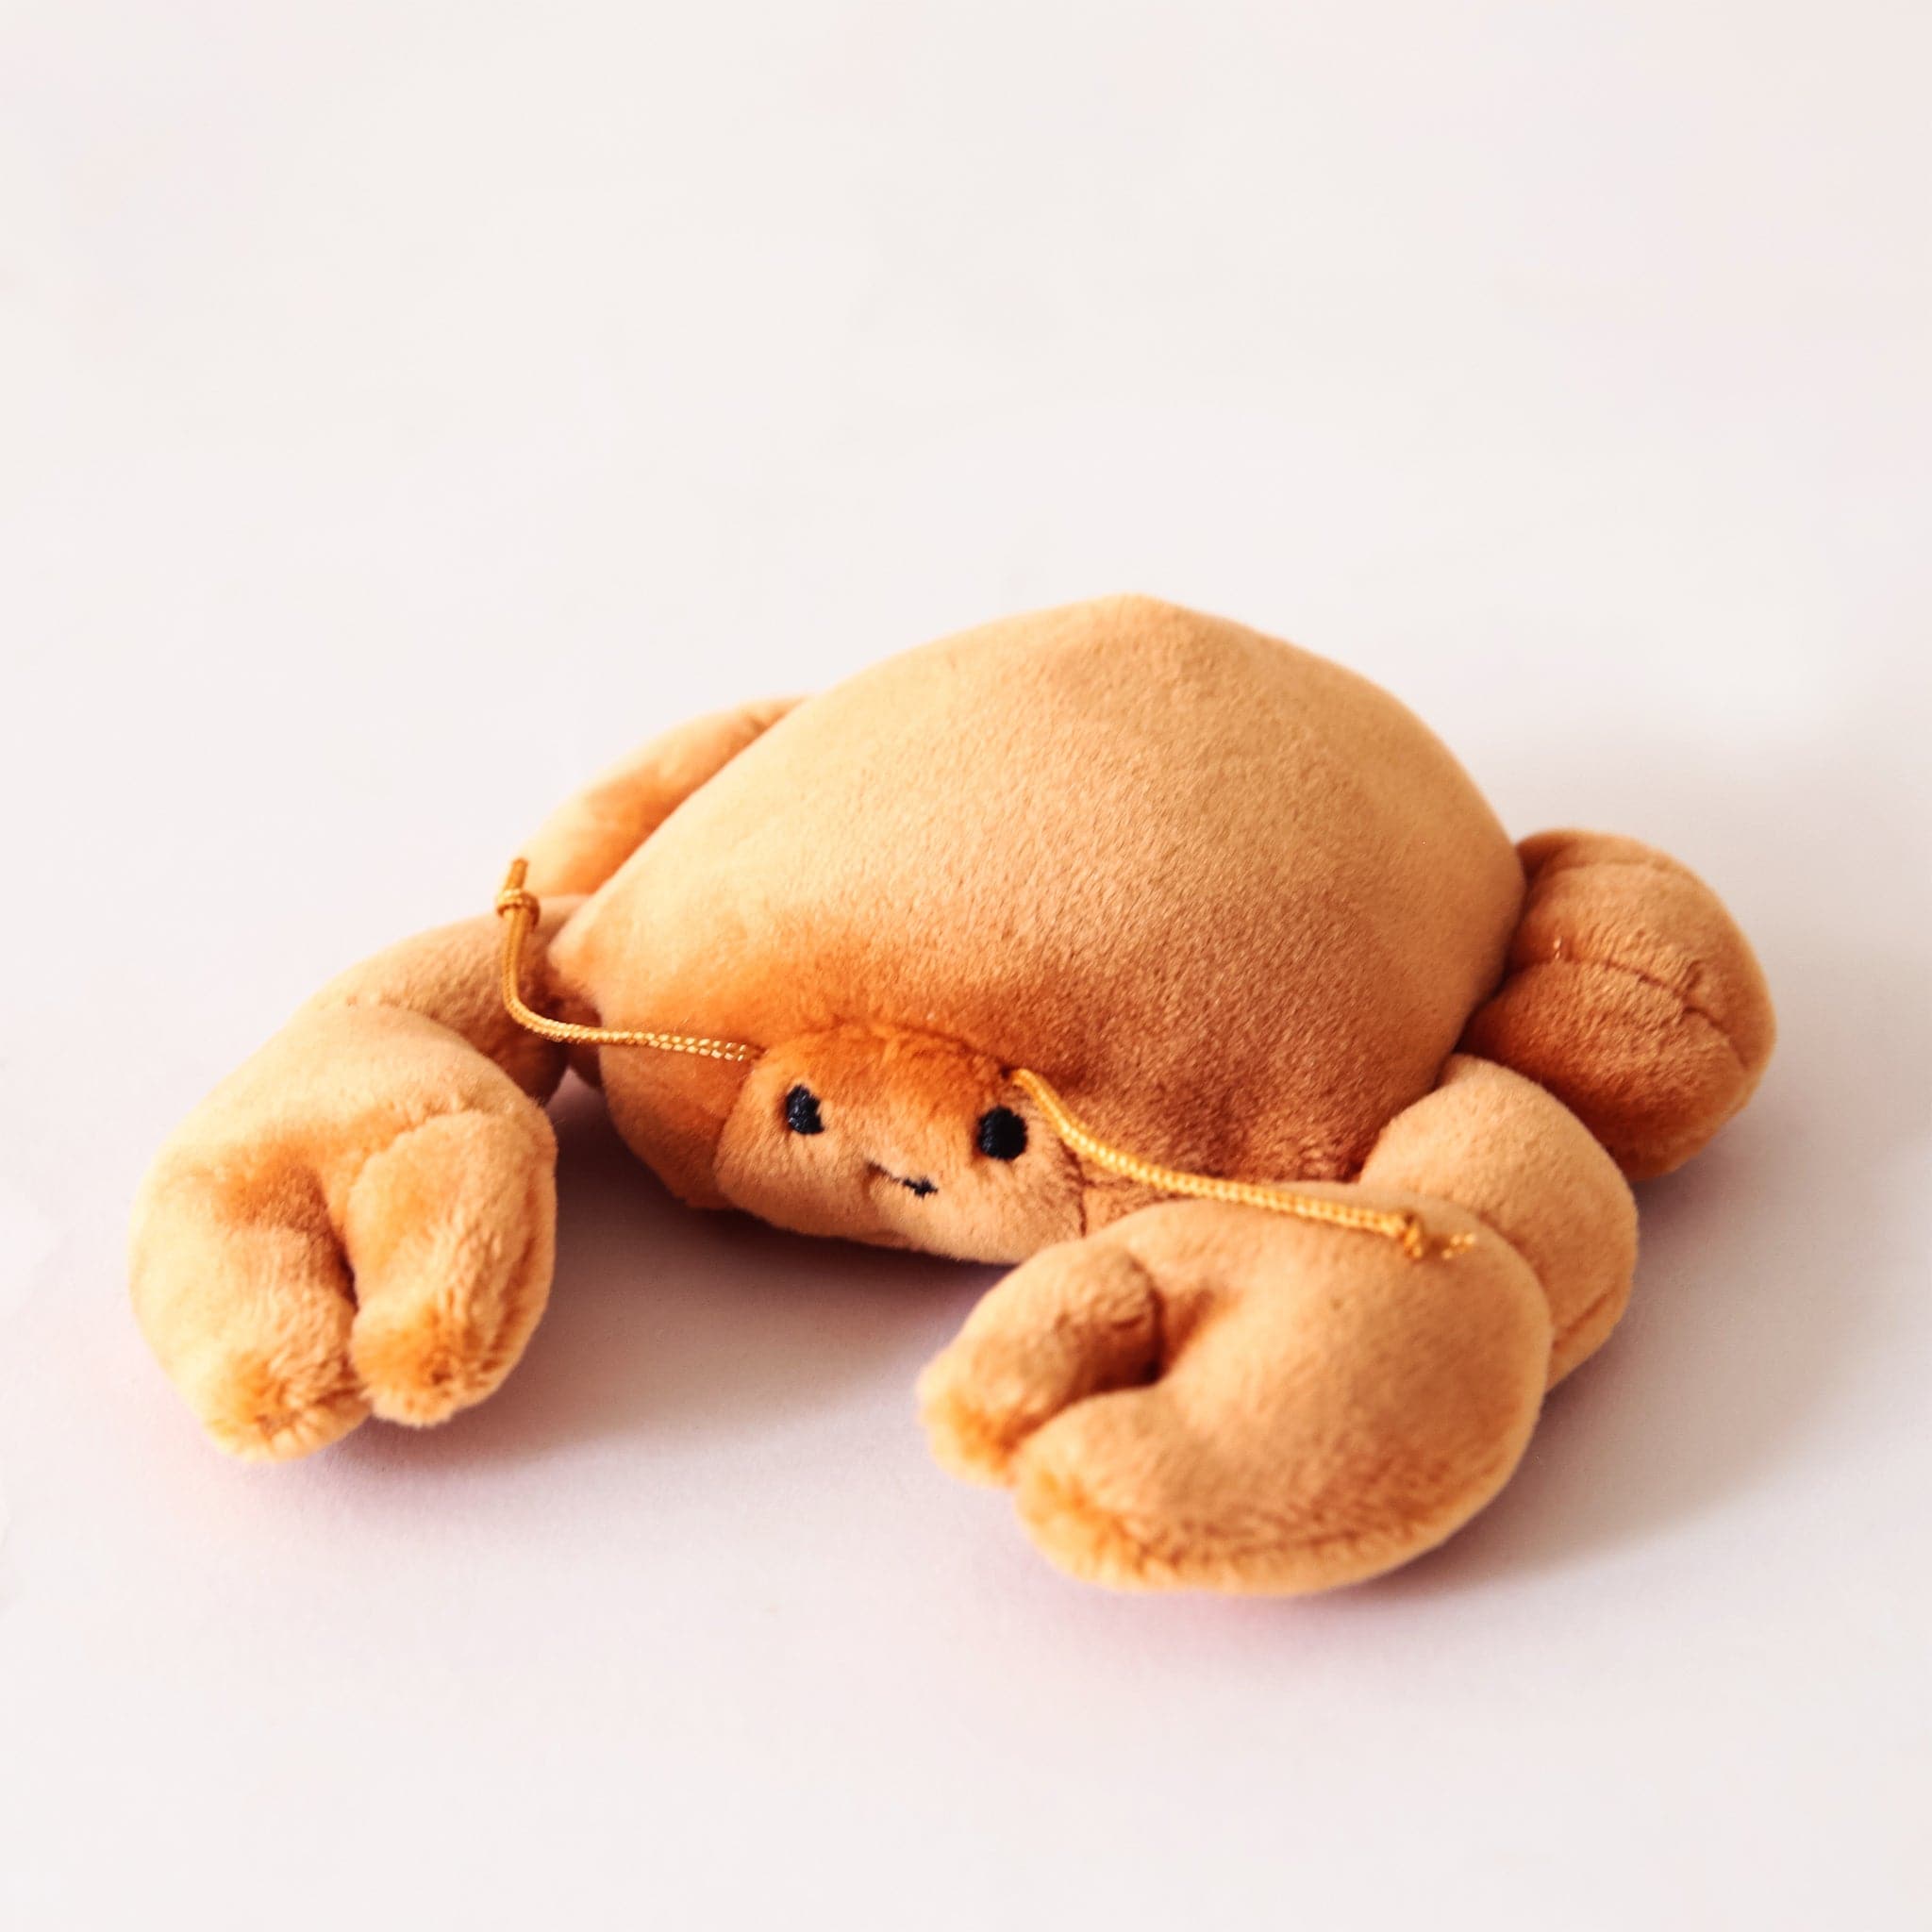 In front of a cream background is a stuffed orange crab laying on its stomach. It has two large claws in the front and two little claws in the back. On its face are two black eyes and a little black smile. He has two orange antennas above his eyes.